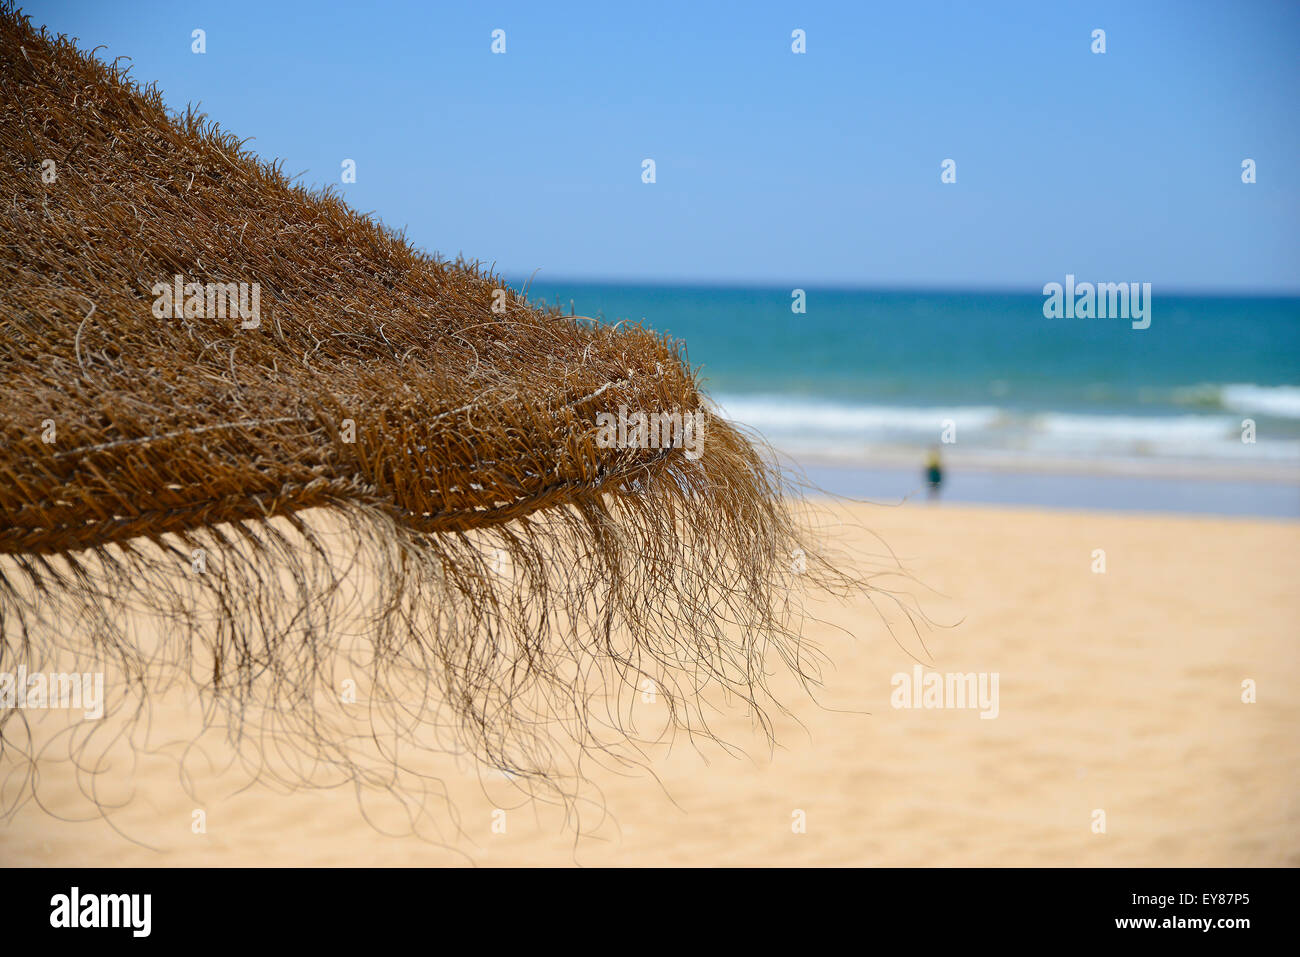 Lady on golden sandy beach with blue sky and blue water Stock Photo